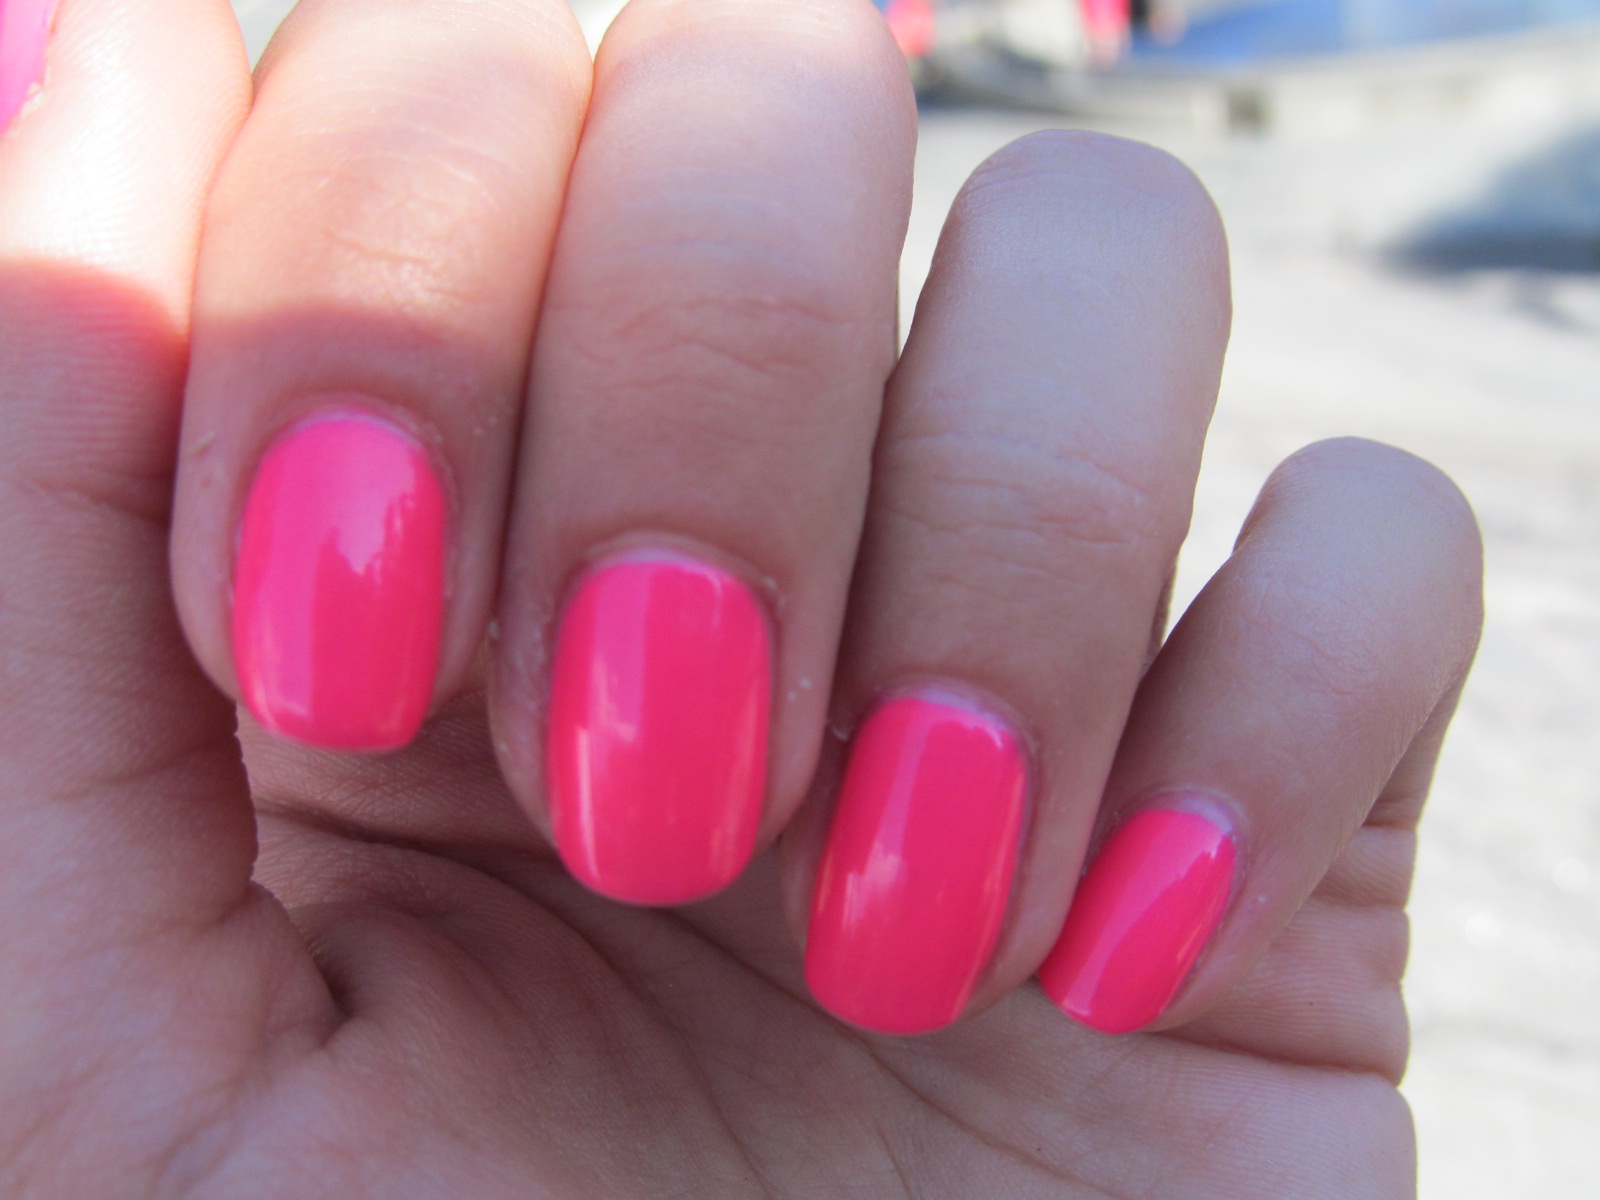 3. Sinful Colors Acid Test Nail Polish in "Hot Pink" - wide 1